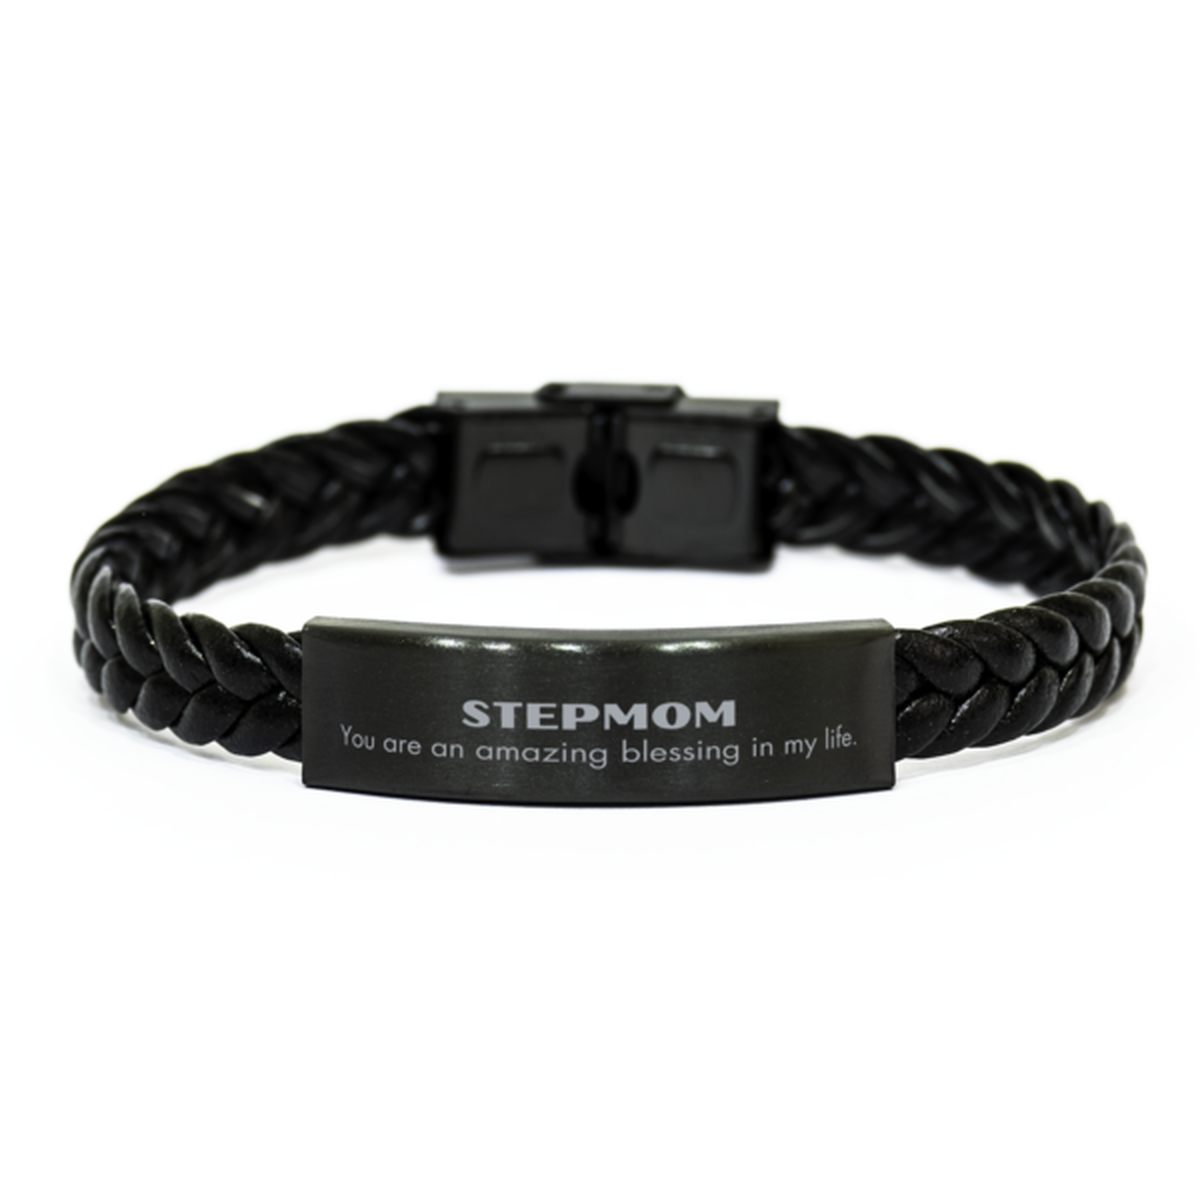 Stepmom Braided Leather Bracelet, You are an amazing blessing in my life, Thank You Gifts For Stepmom, Inspirational Birthday Christmas Unique Gifts For Stepmom